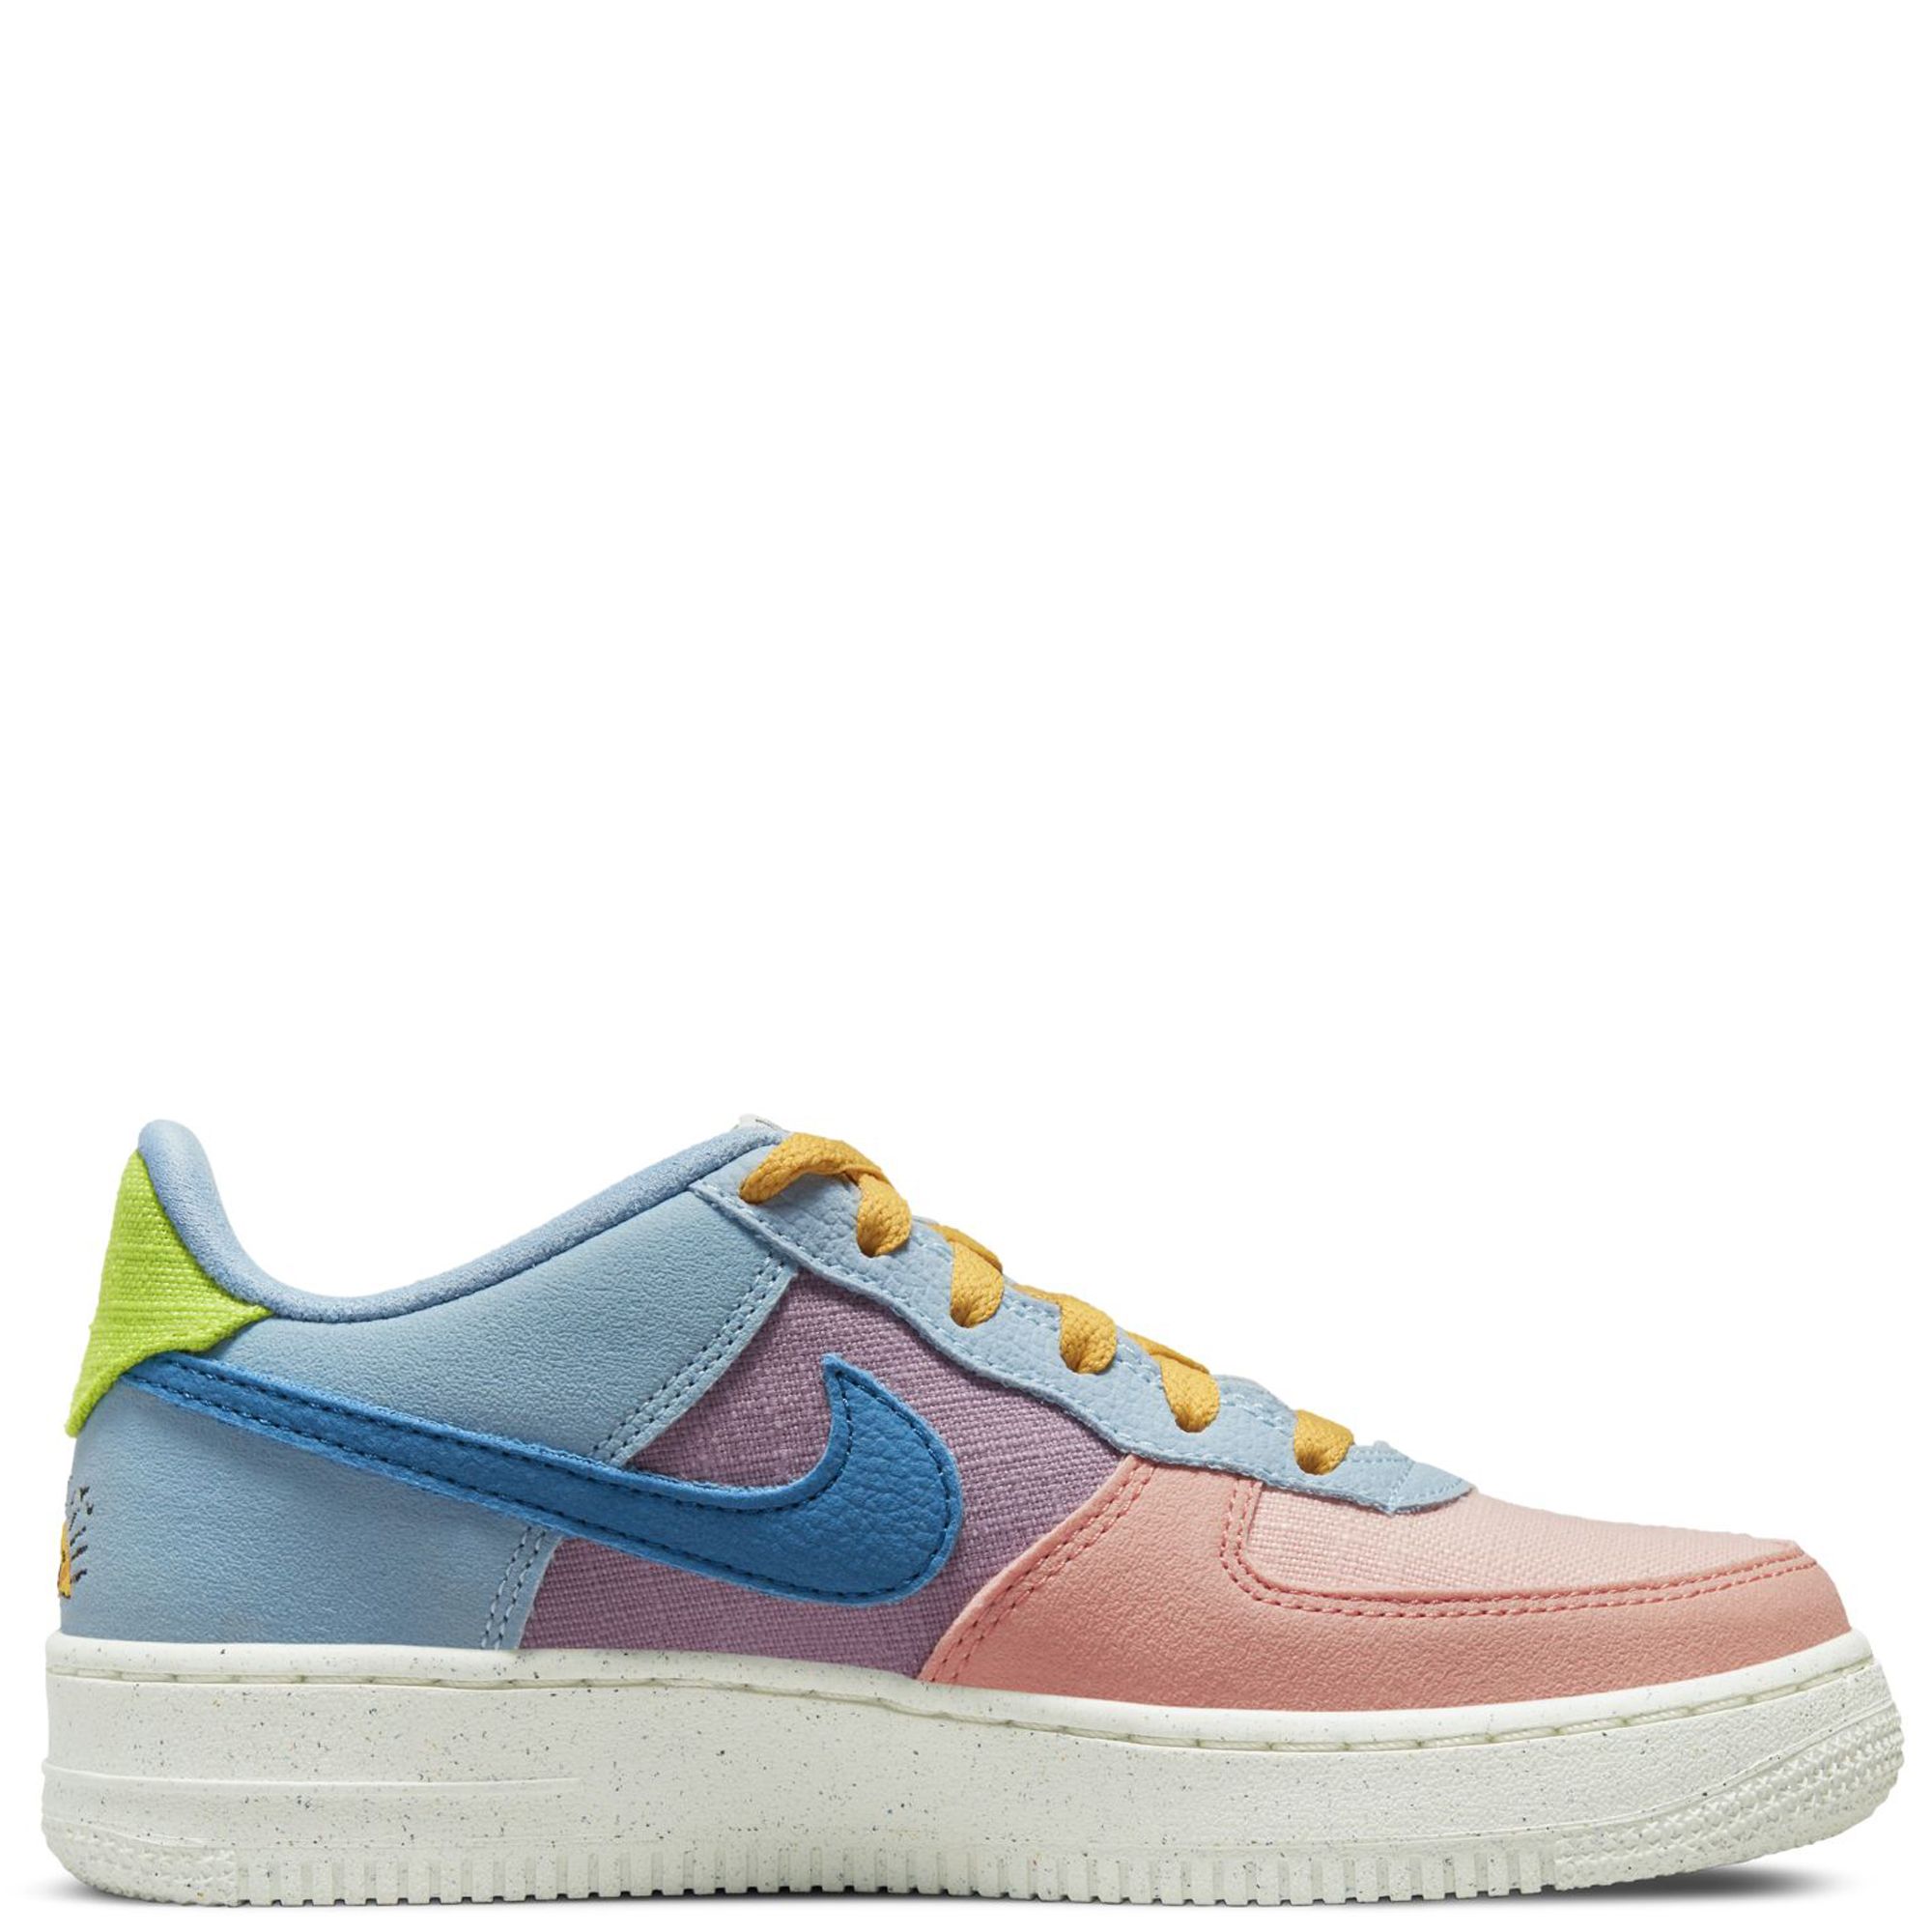 Nike Air Force 1 LV8 Sanded Gold /Hot Curry/Wheat Grass - DM0984-700